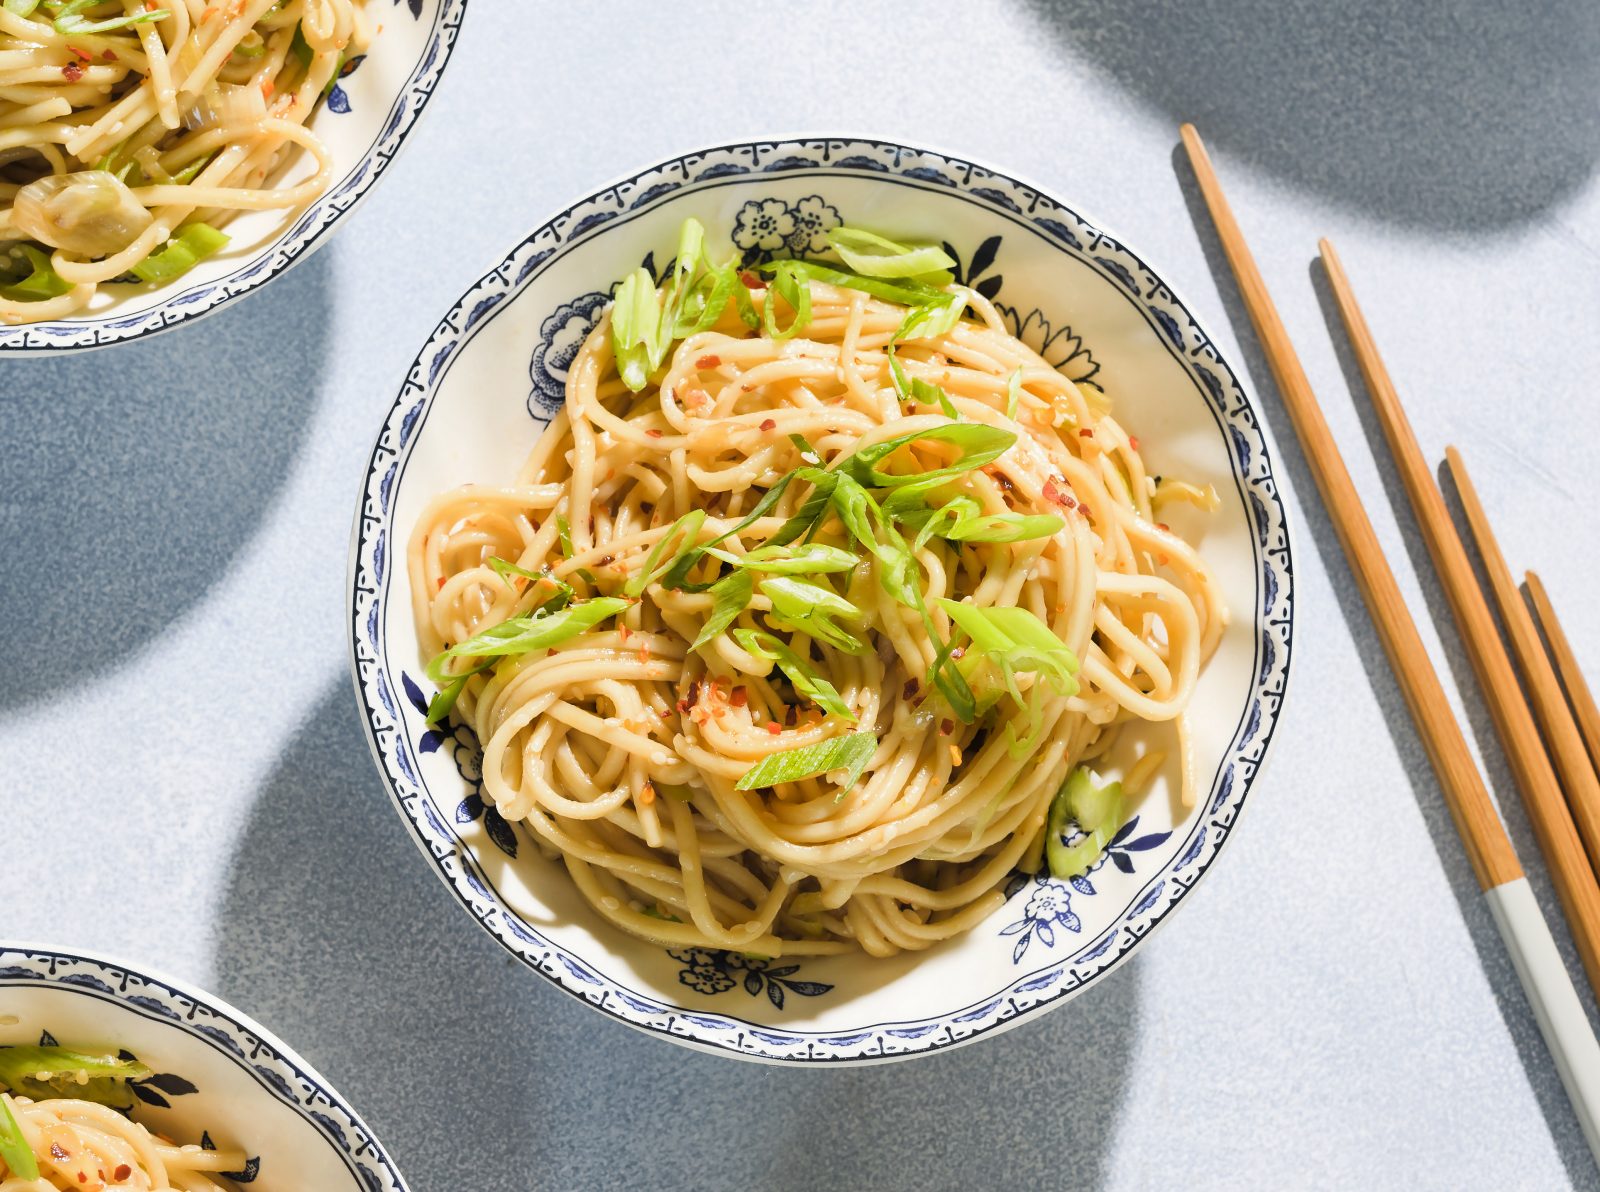 https://www.177milkstreet.com/assets/site/Recipes/_large/Chinese-Chili-and-Scallion-Noodles.jpg